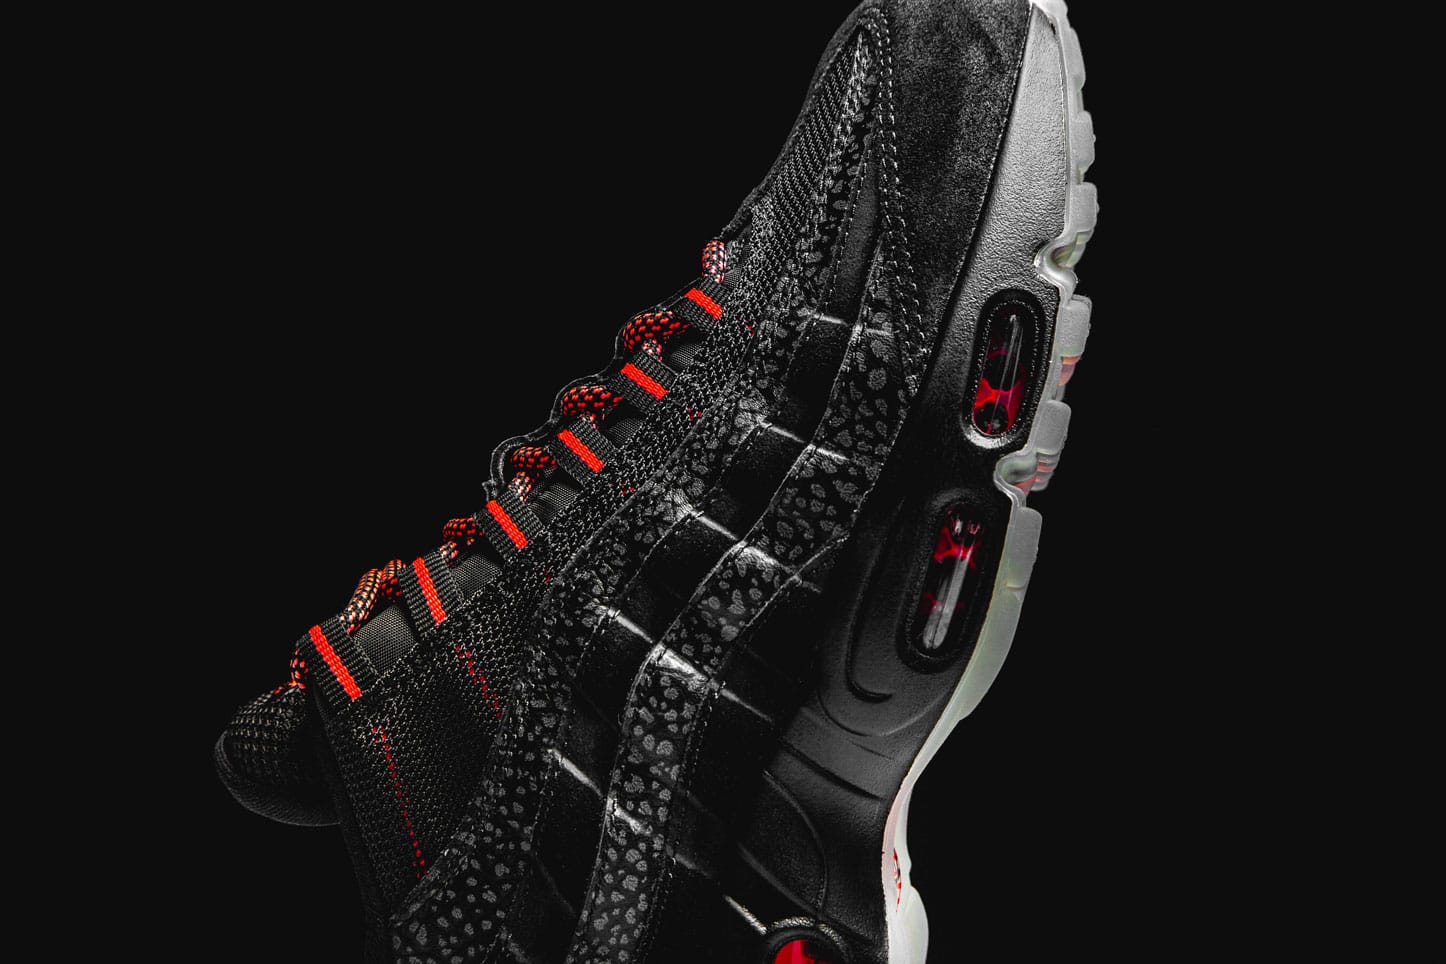 nike air 95 black and red